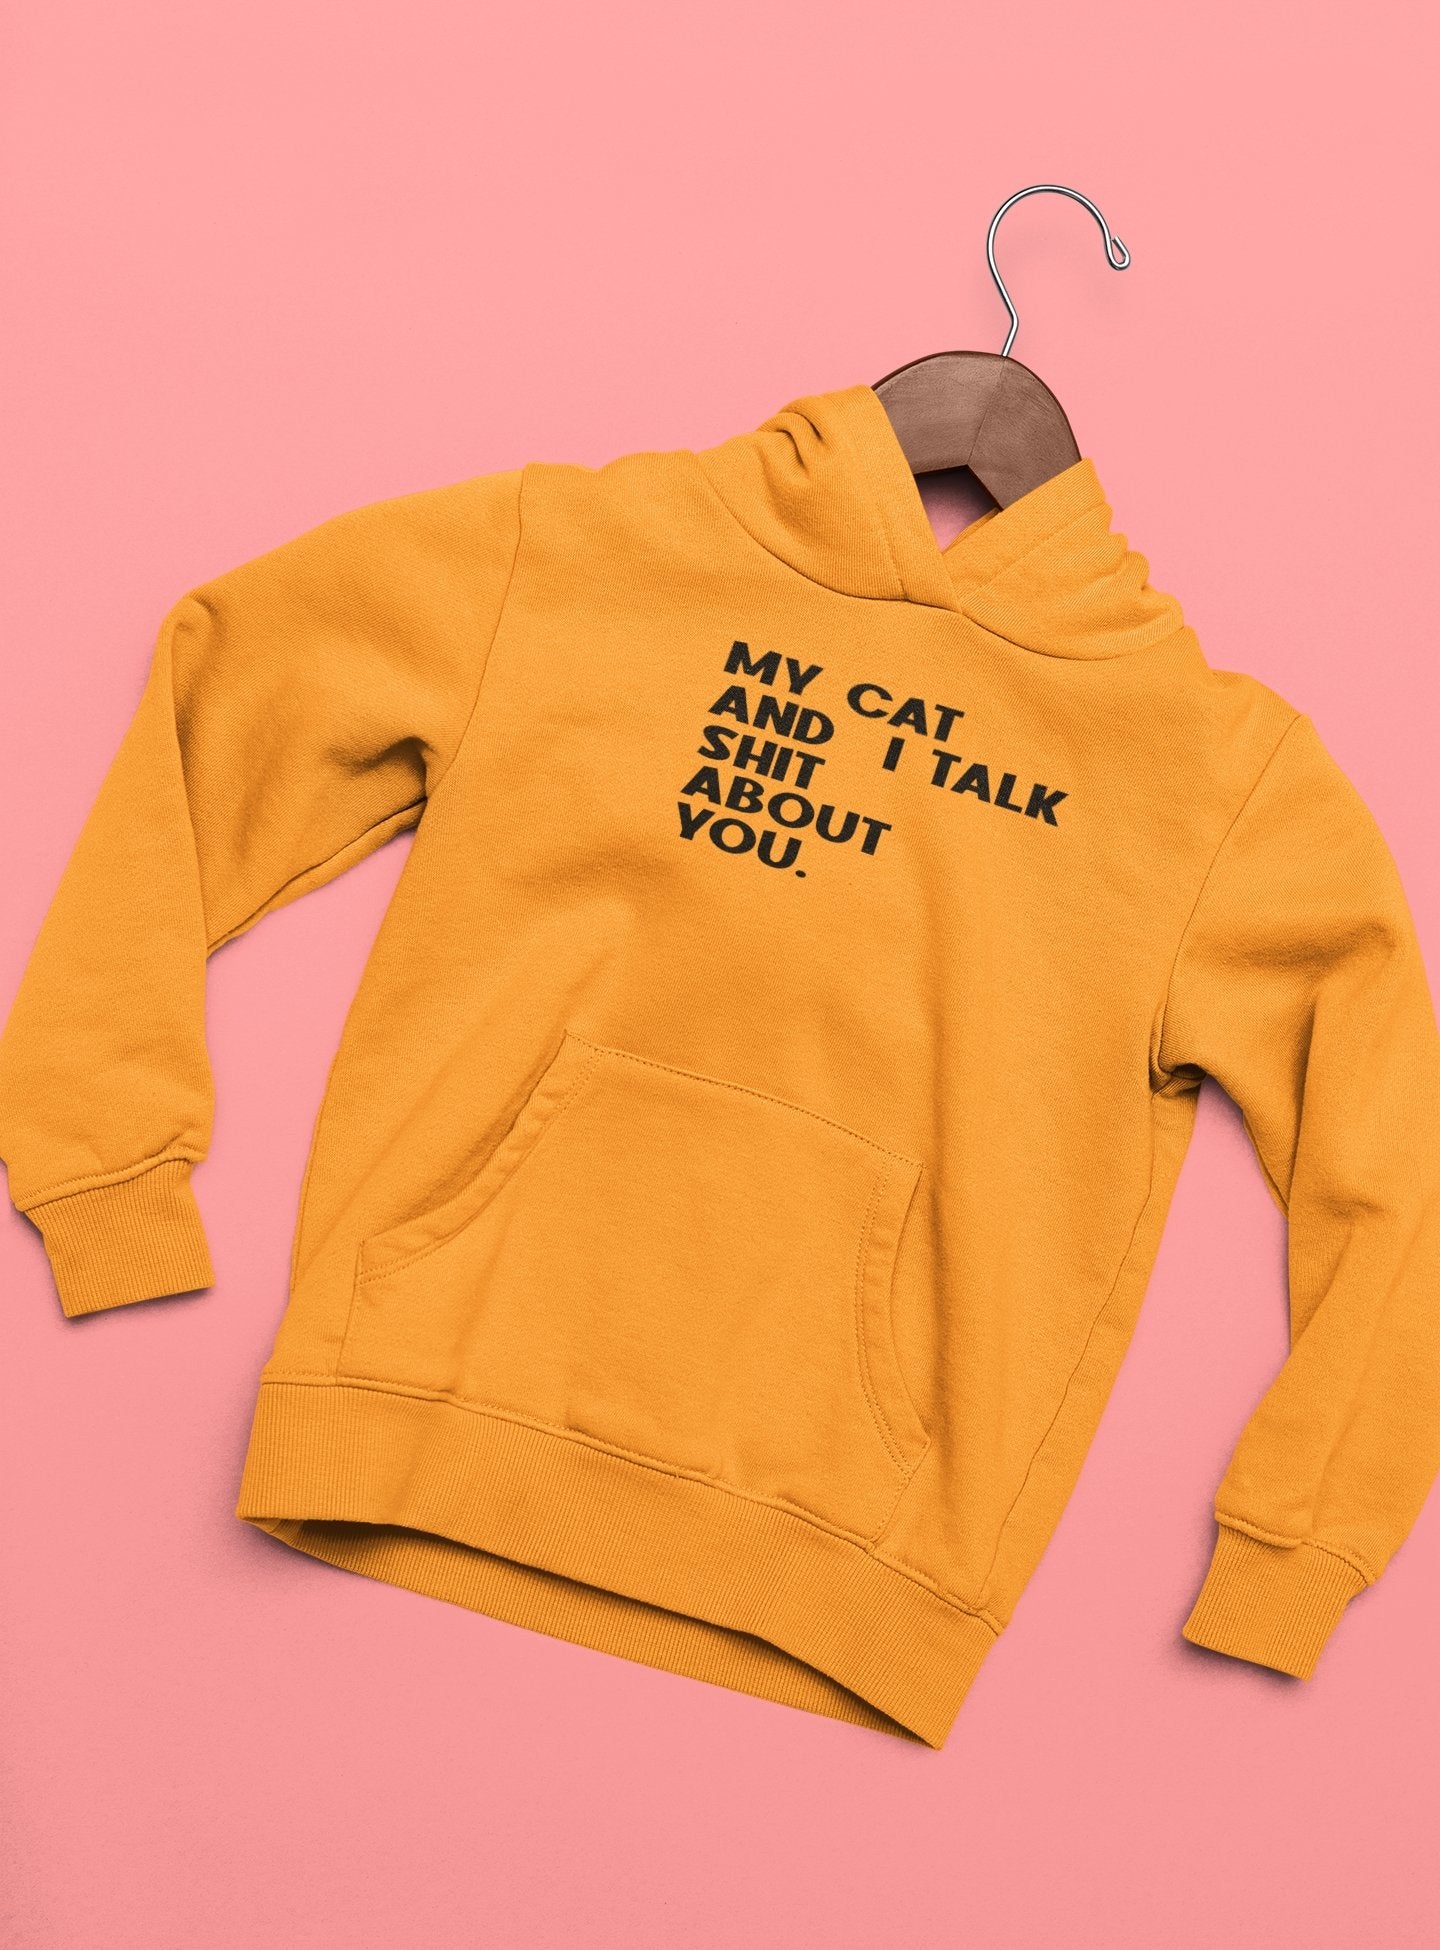 My Cat And I Talk Shit About You Hoodies for Women-FunkyTeesClub - Funky Tees Club